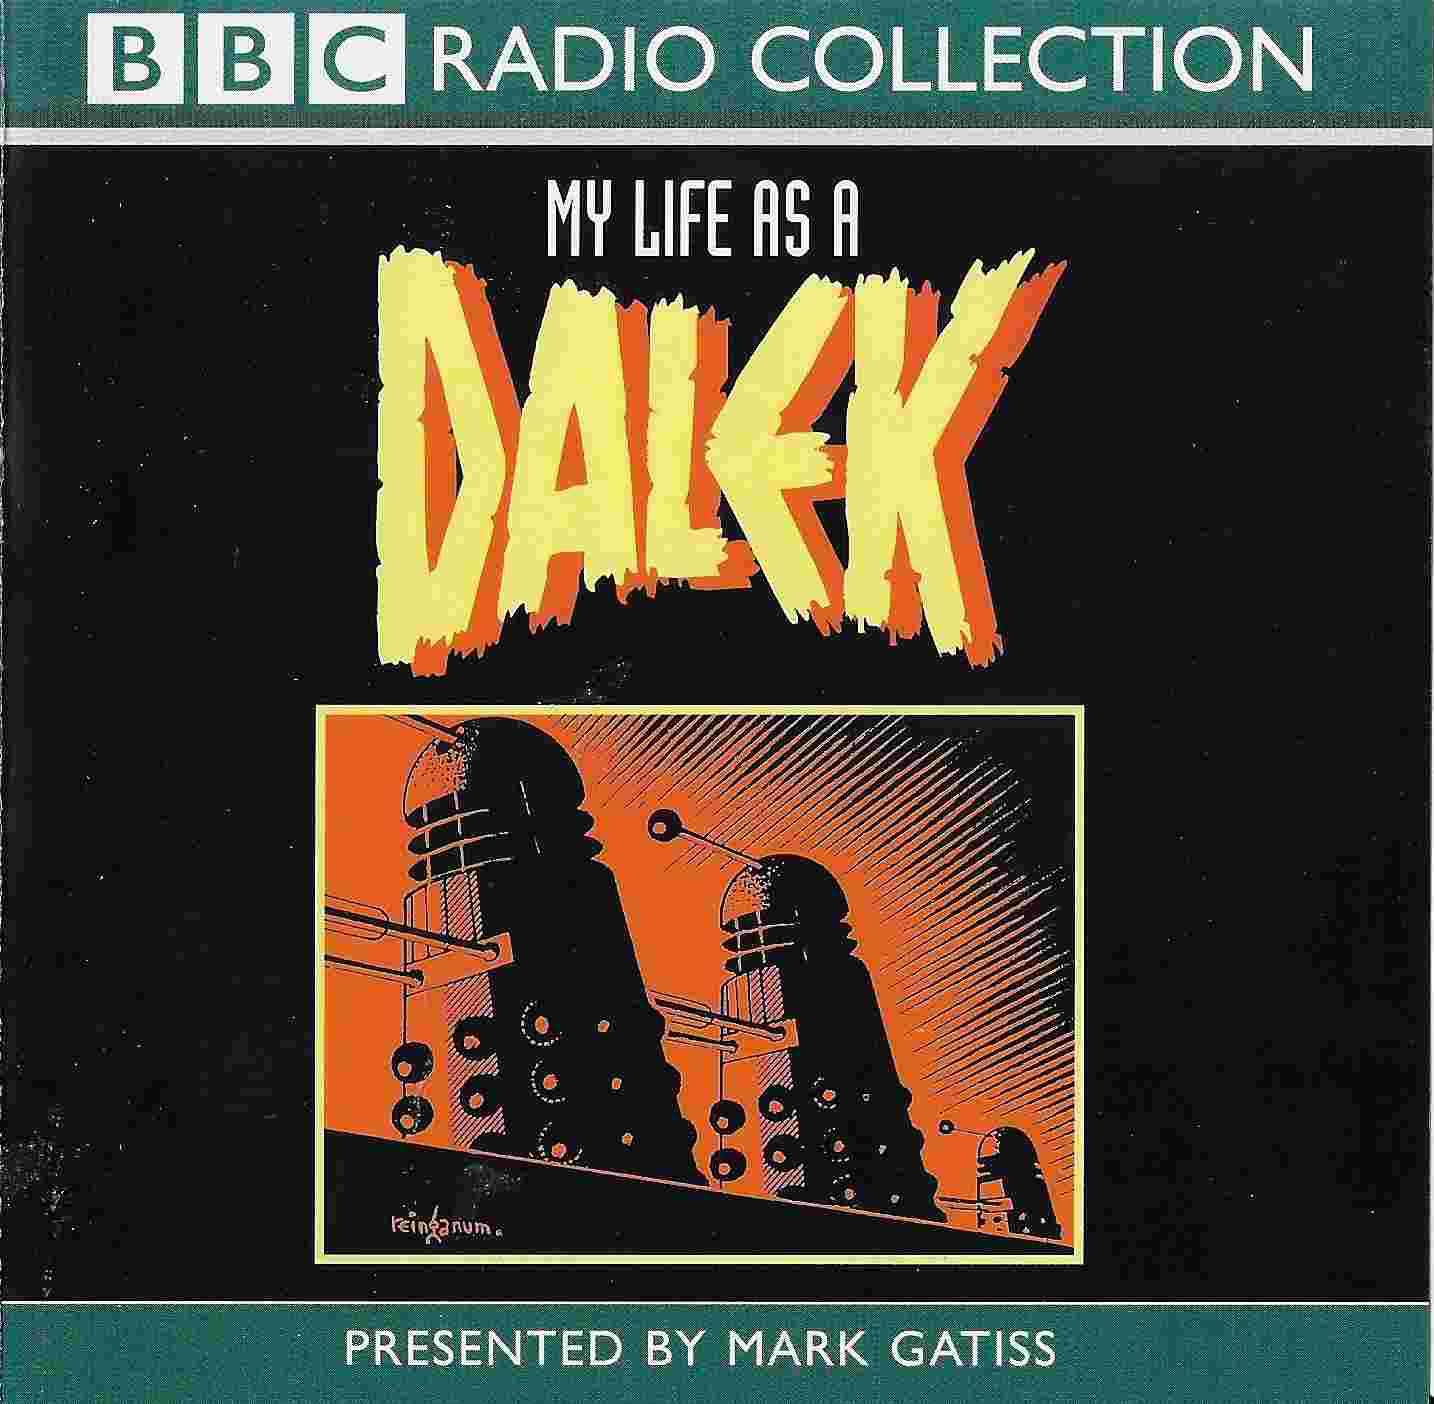 Picture of ISBN 0-563-49476-X3 Doctor Who - My Life as a Dalek by artist Mark Gatiss from the BBC records and Tapes library